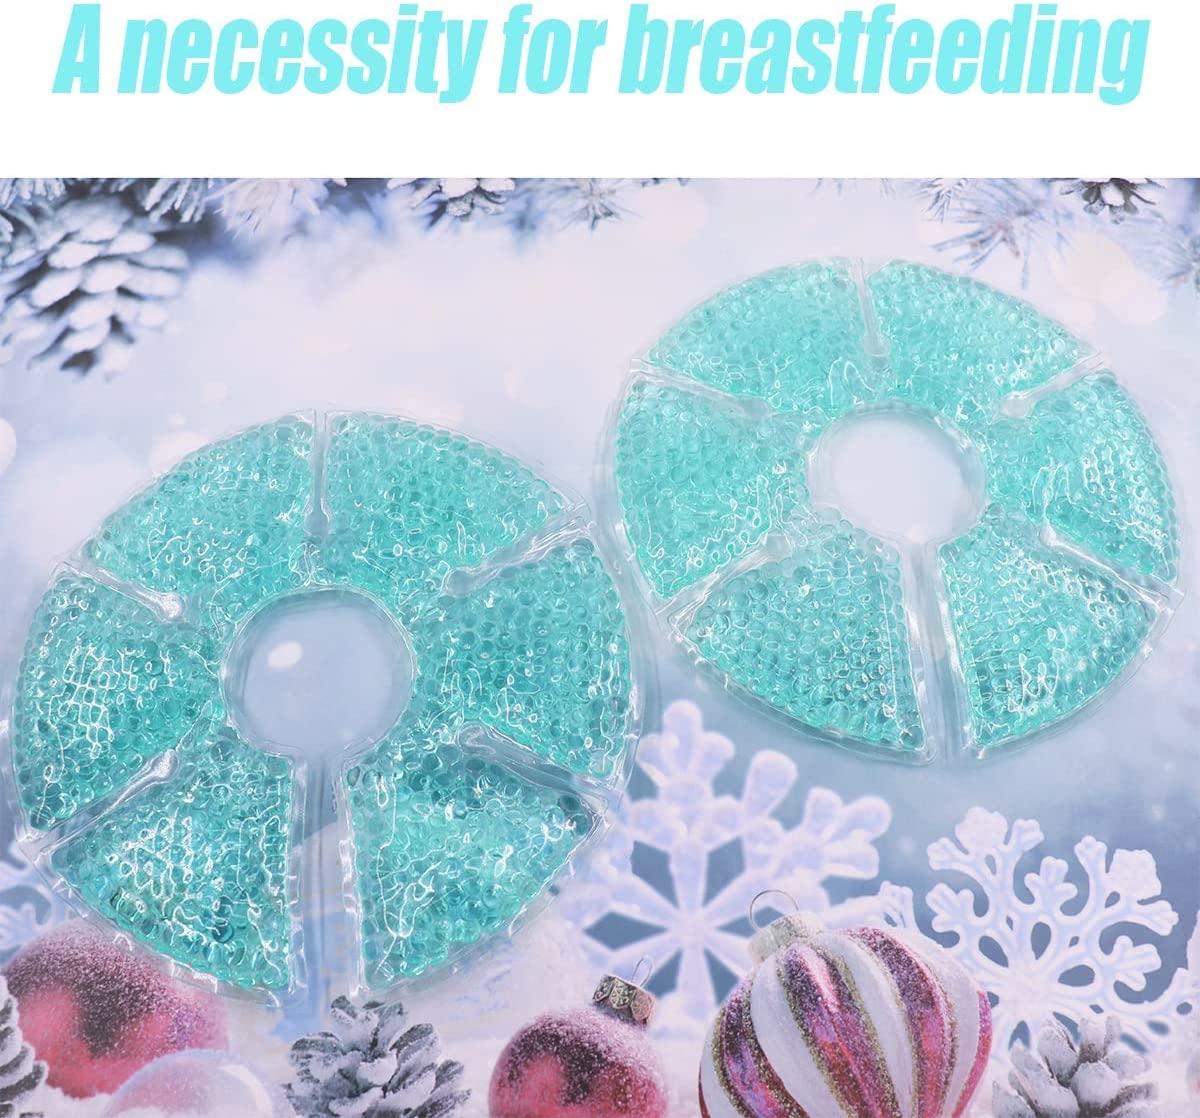  Breast Therapy Pads Breast Ice Pack, Hot Cold Breastfeeding  Gel Pads, Boost Milk Let-Down with Gel Packs, Blue,2 Count… (Blue) : Baby